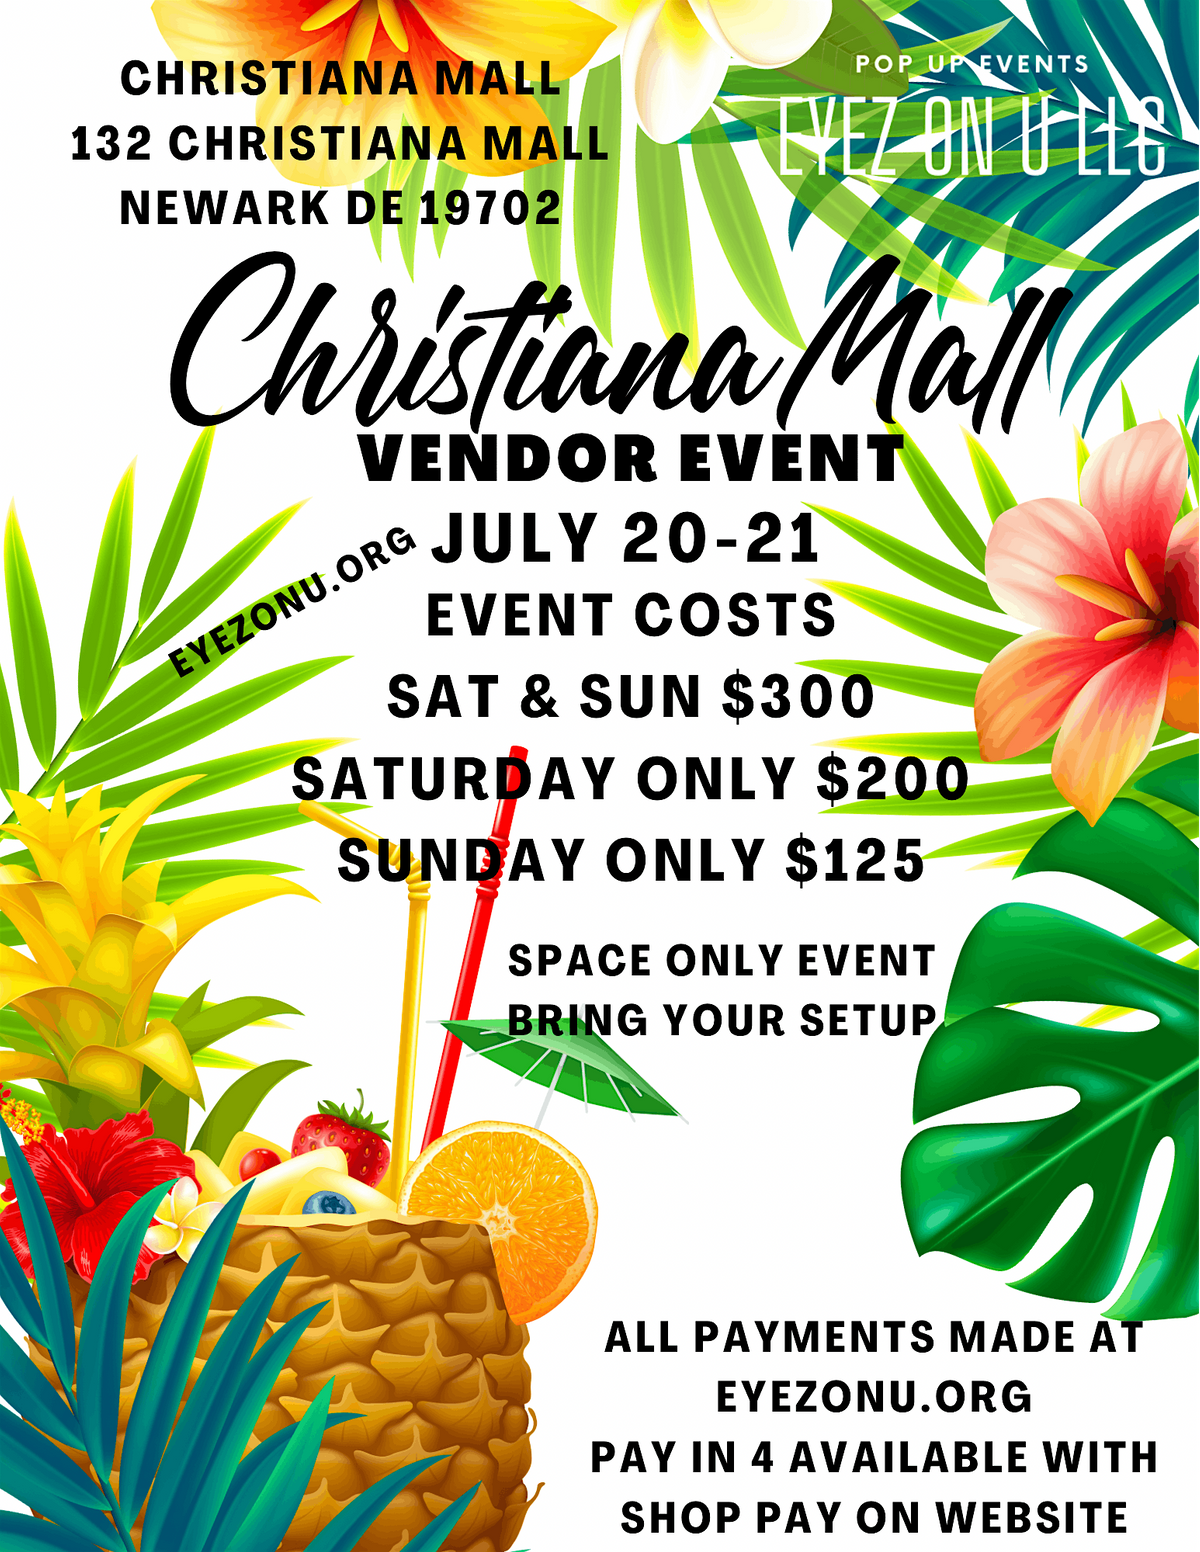 Vendors Wanted for our 2 day Vendor event at Christiana Mall July 20-21